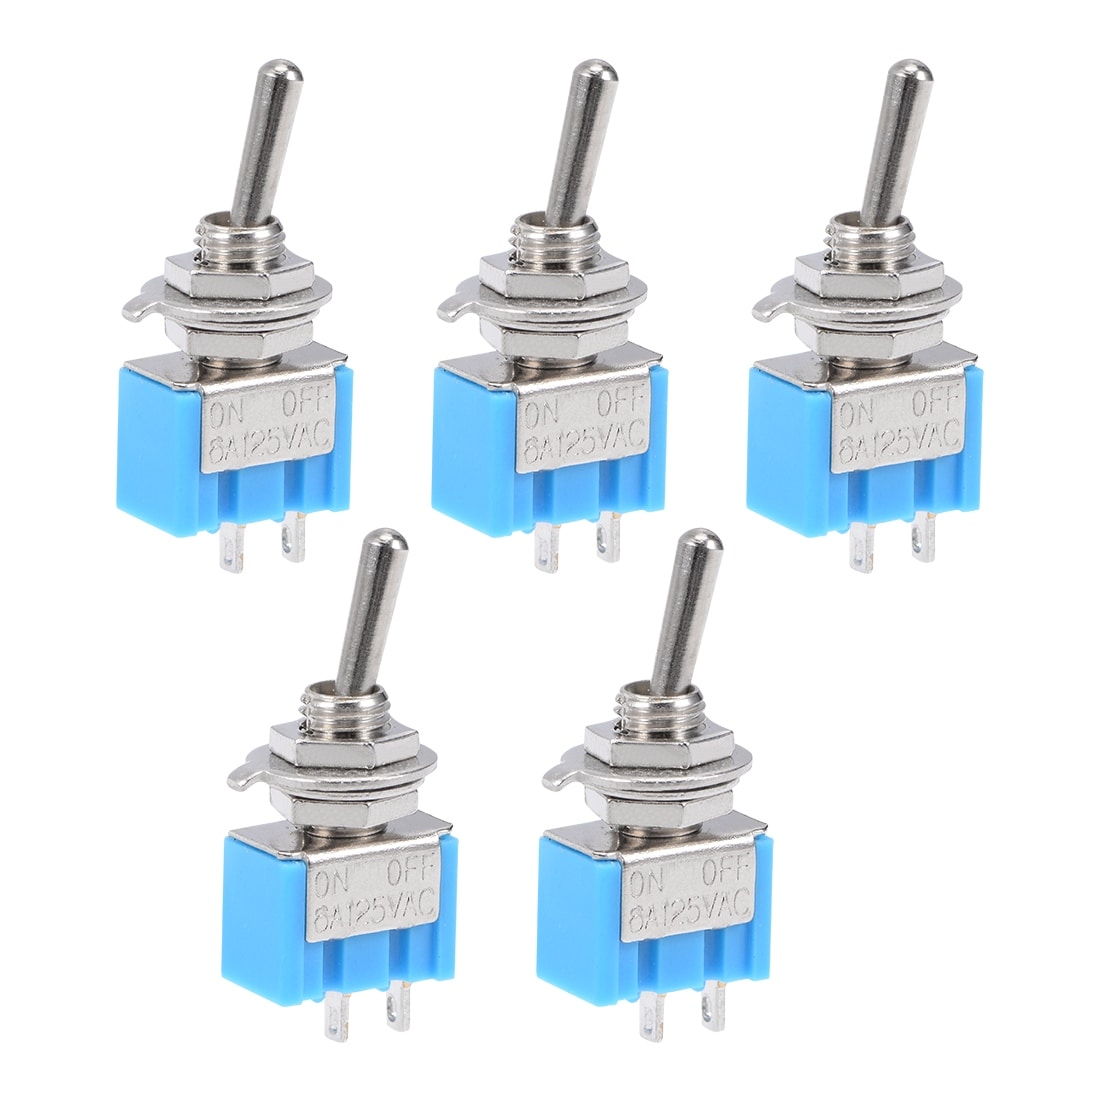 5 Pcs AC ON/OFF SPDT 2 Position Latching Toggle Switch